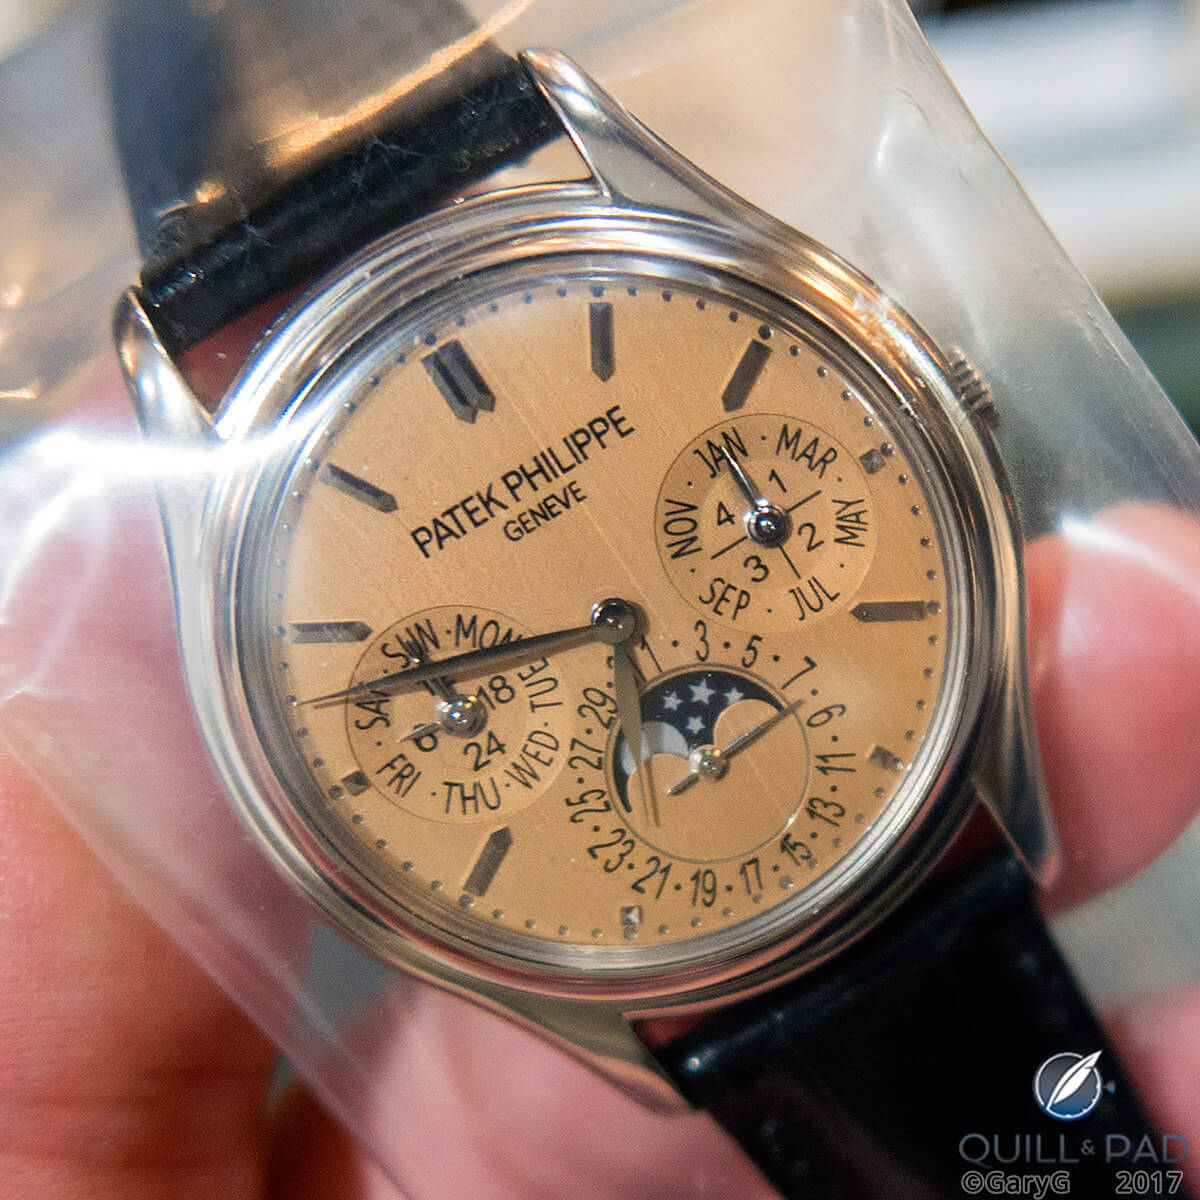 Look carefully: rare Patek Philippe Reference 3940 “salmon dial” in plastic